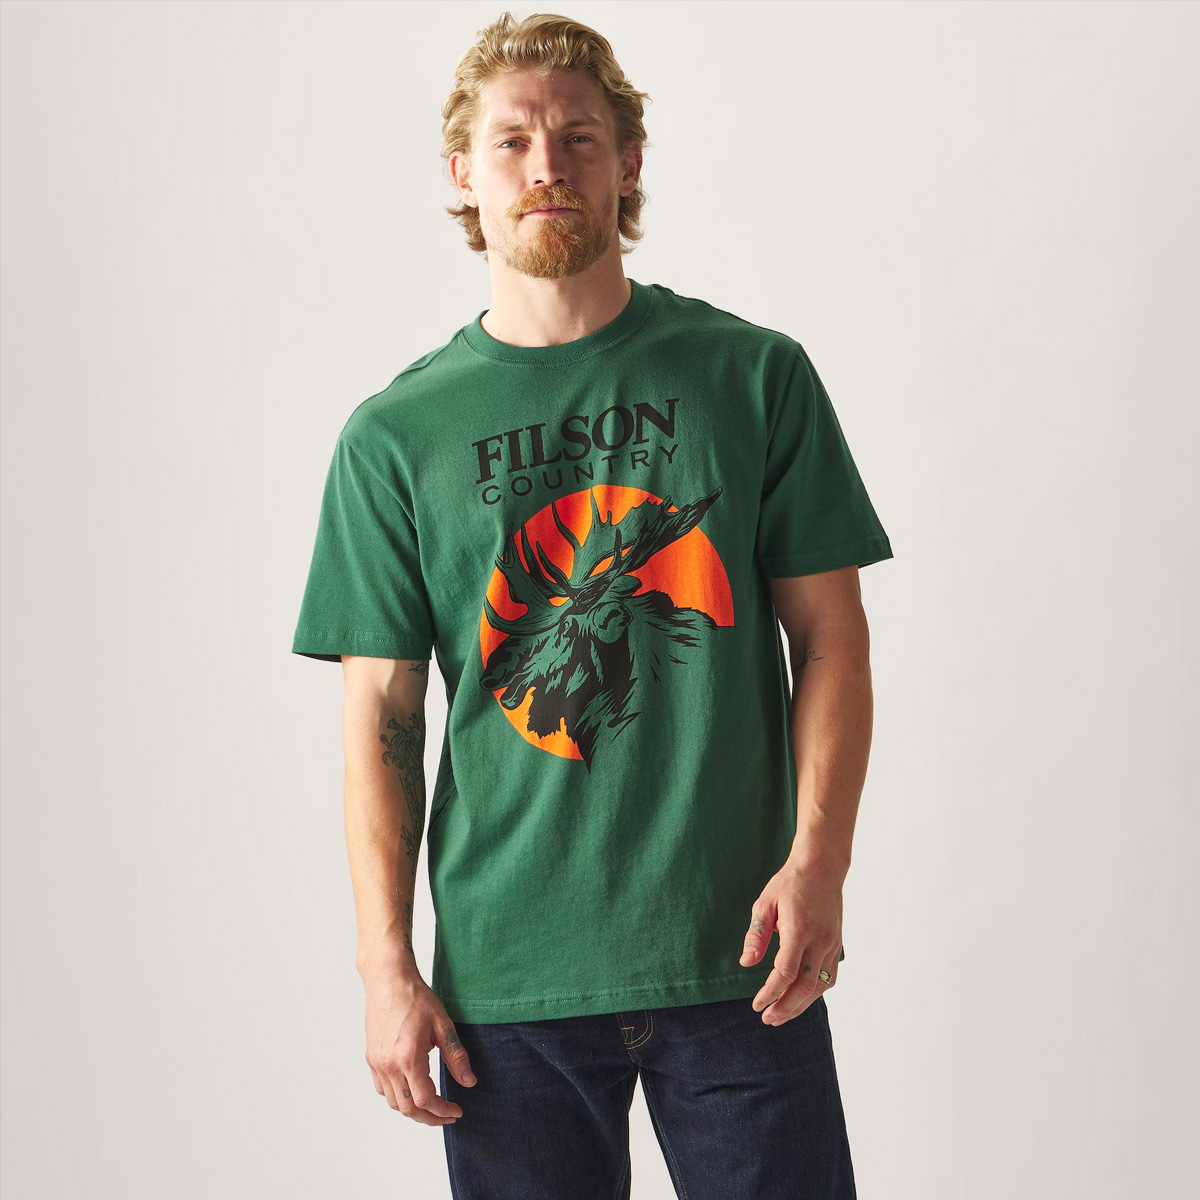 Filson Pioneer Graphic T-Shirt Green/Moose, made of 100% cotton with texture, structure and a dry-hand feel